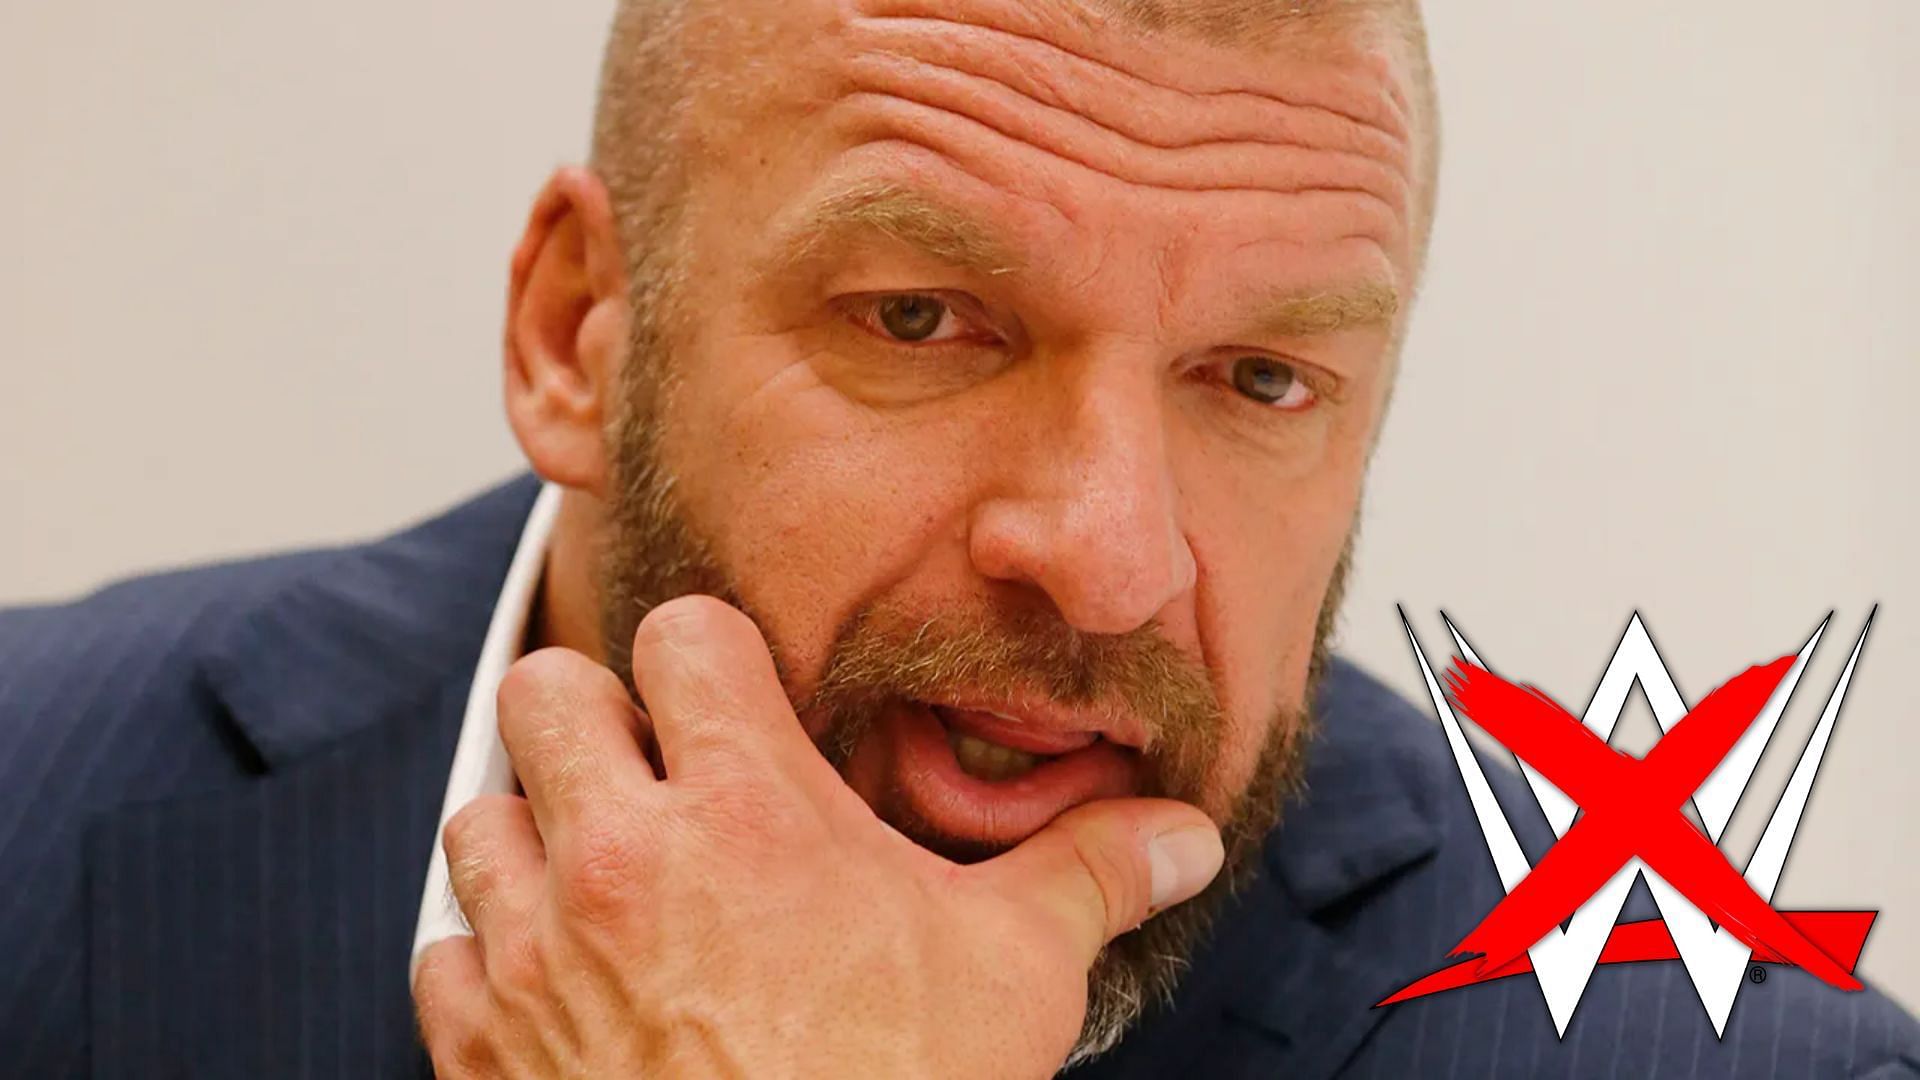 Triple H has brought back numerous former WWE stars, but could he ever steal one from AEW?